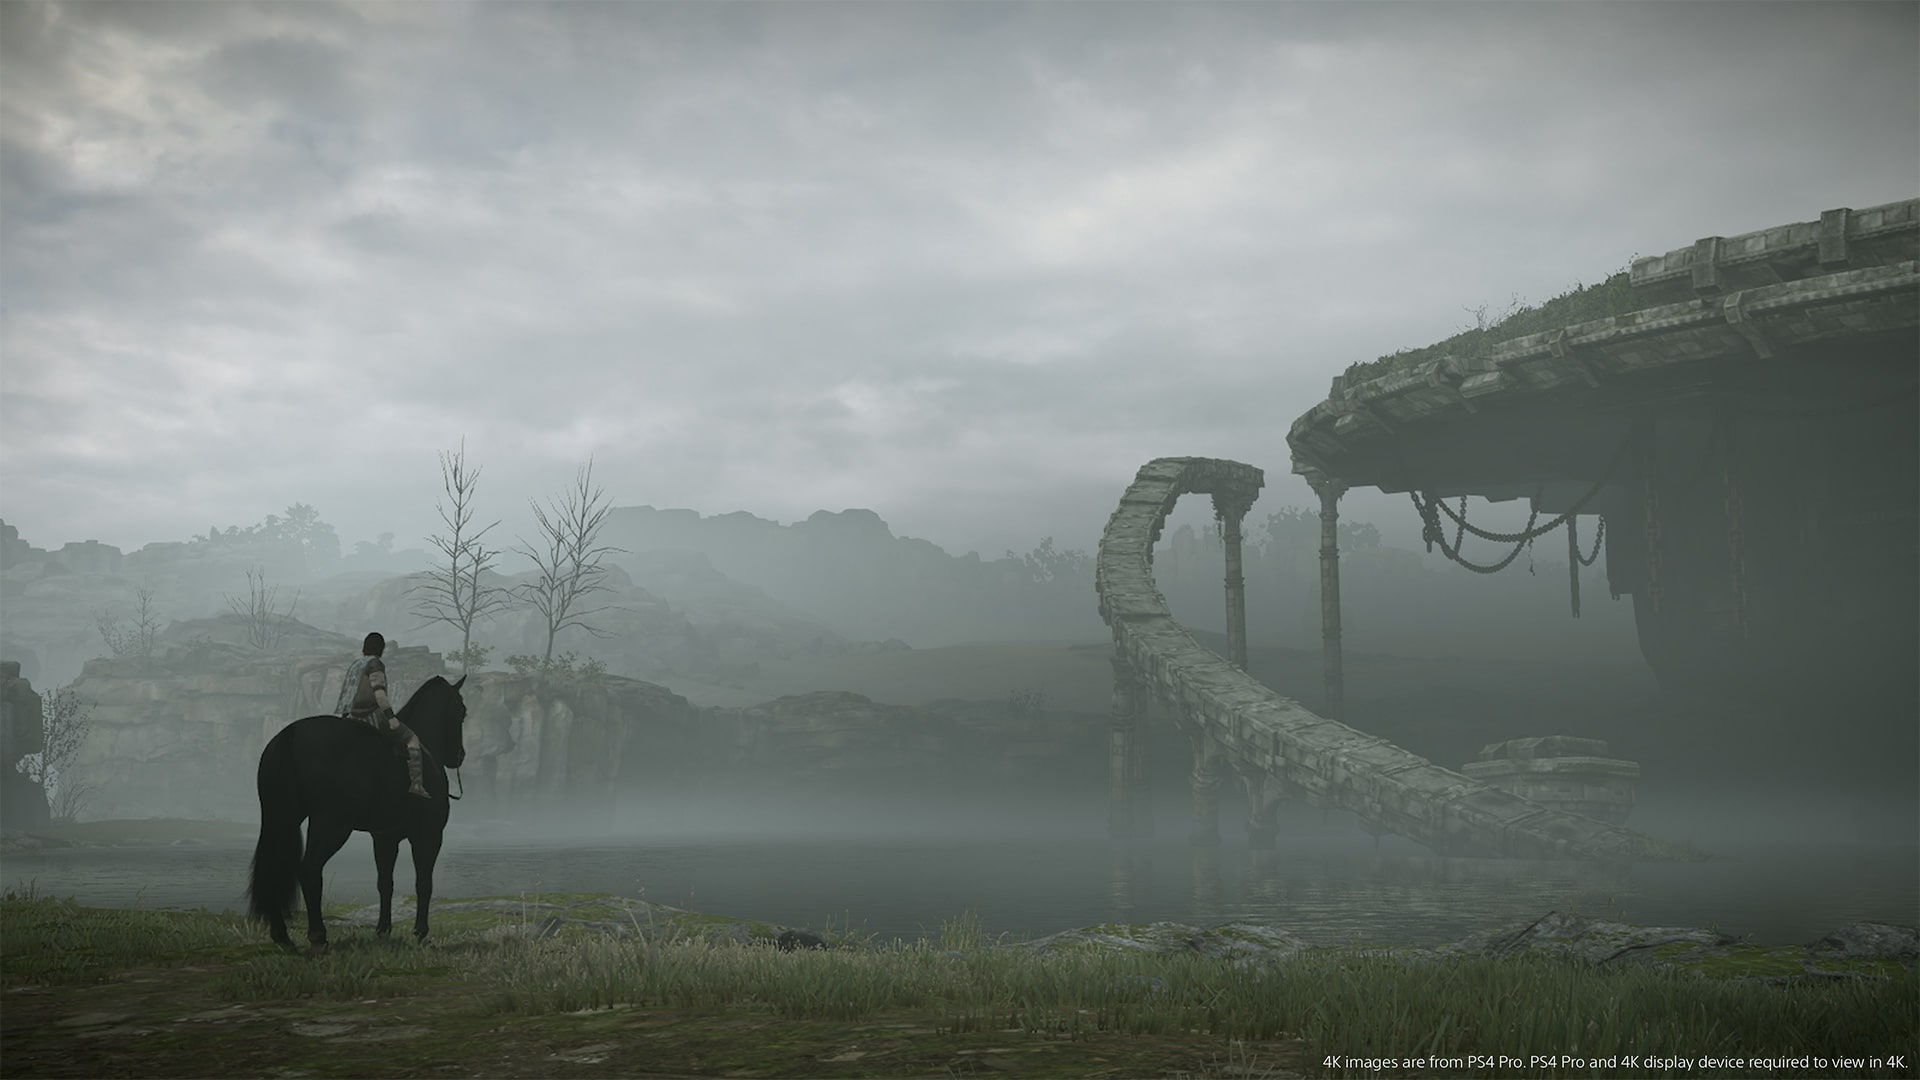 shadow of the colossus psn